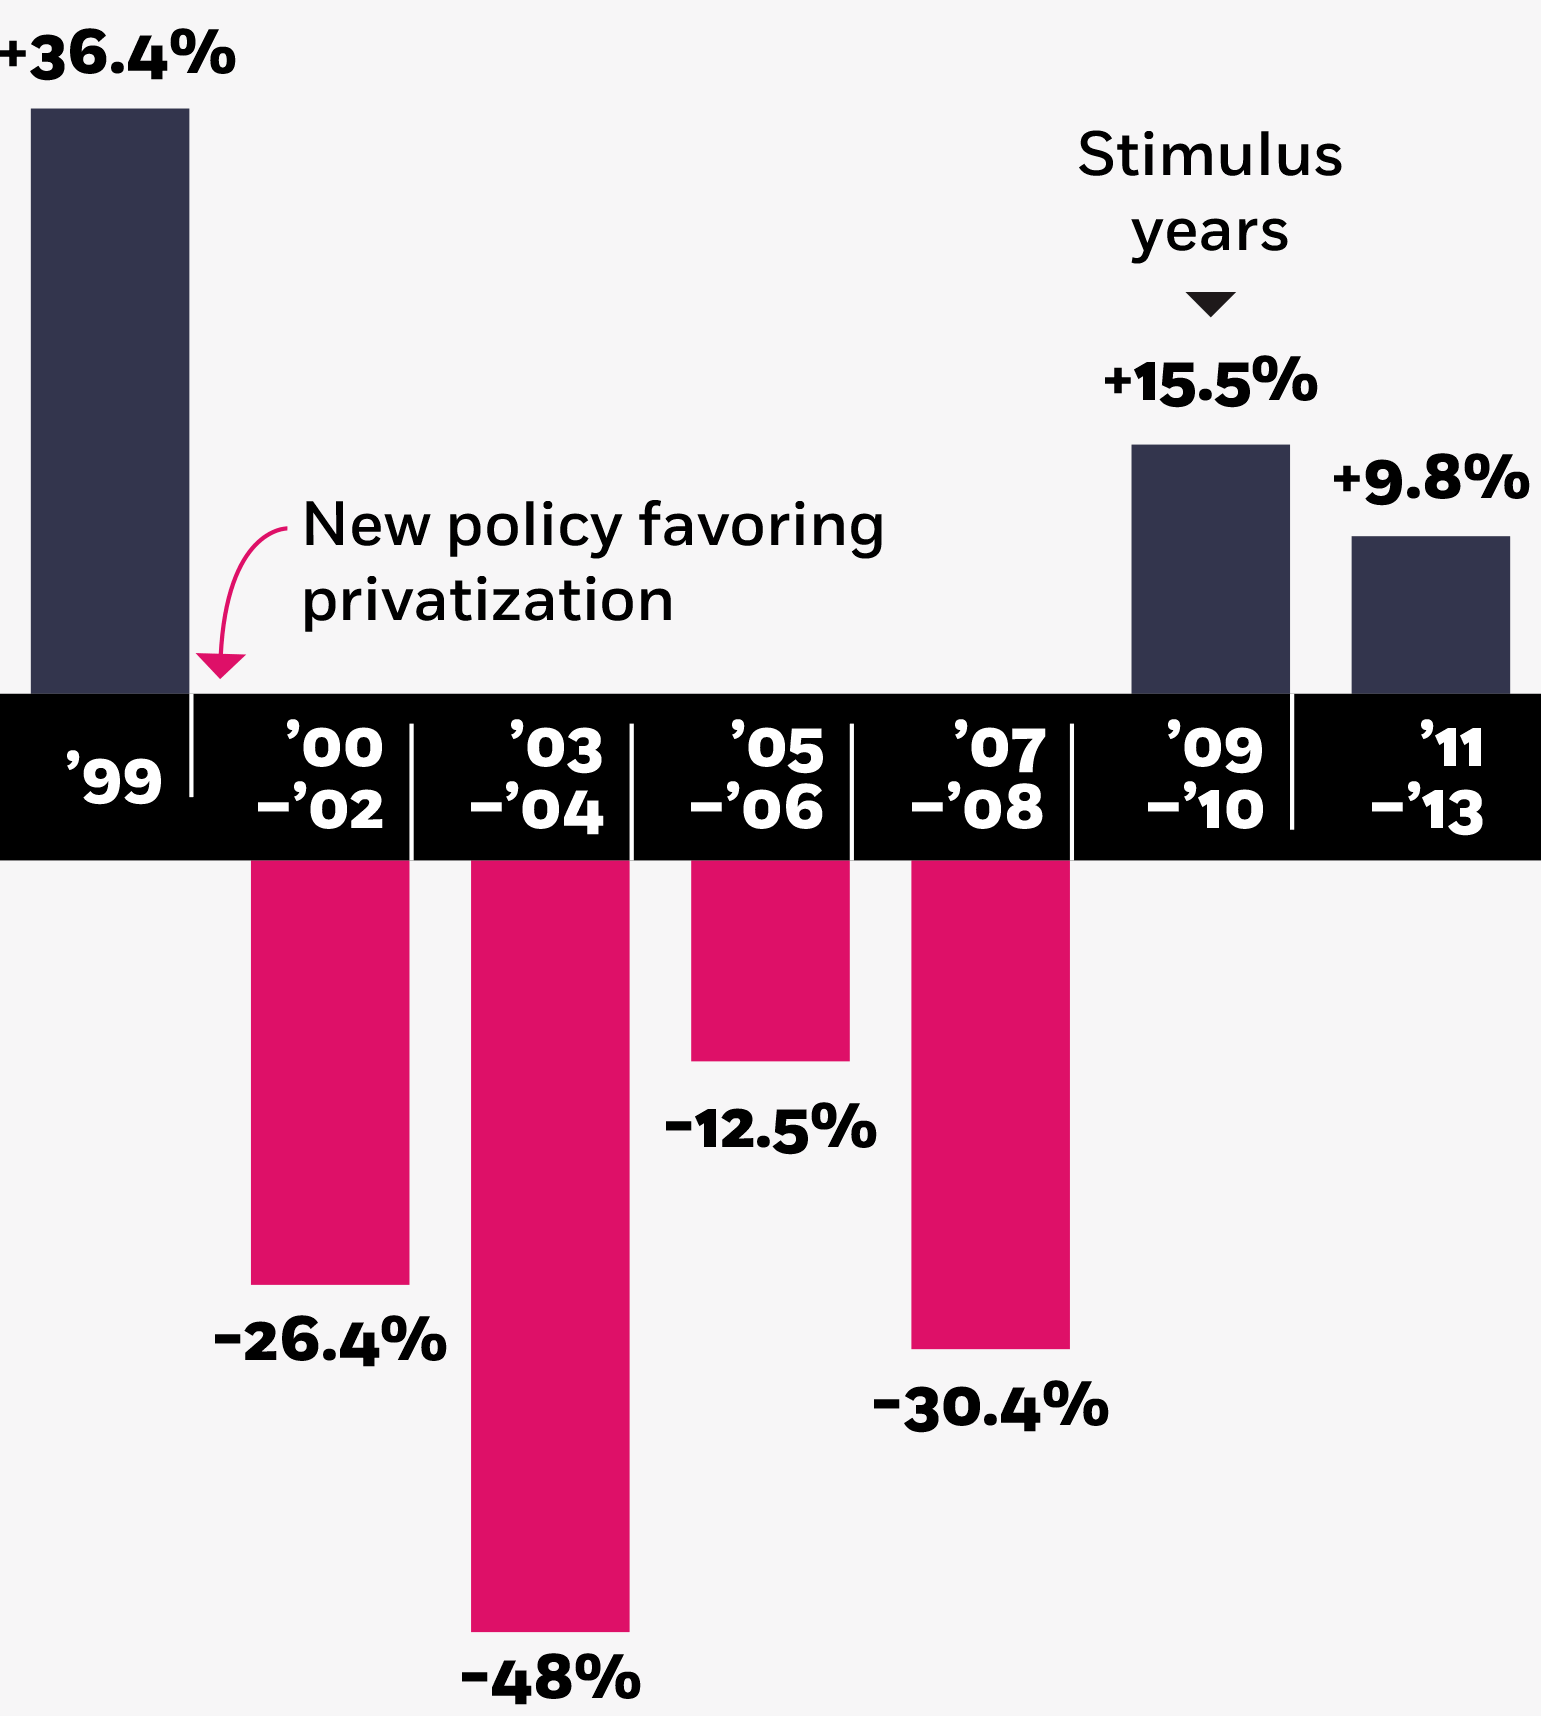 A column bar chart with percentages on the y-axis and the years of 1999 to 2013 on the x-axis. Following an annotation marking the timing of a new policy favoring privatization, the years of 2000 to 2008 have downward bars ranging from negative twelve-point-five to negative forty-eight. The stimulus years of 2009 and 2010 have a positive fifteen-point-five percent bar, and the years of 2011 to 2013 are positive nine-point-eight.